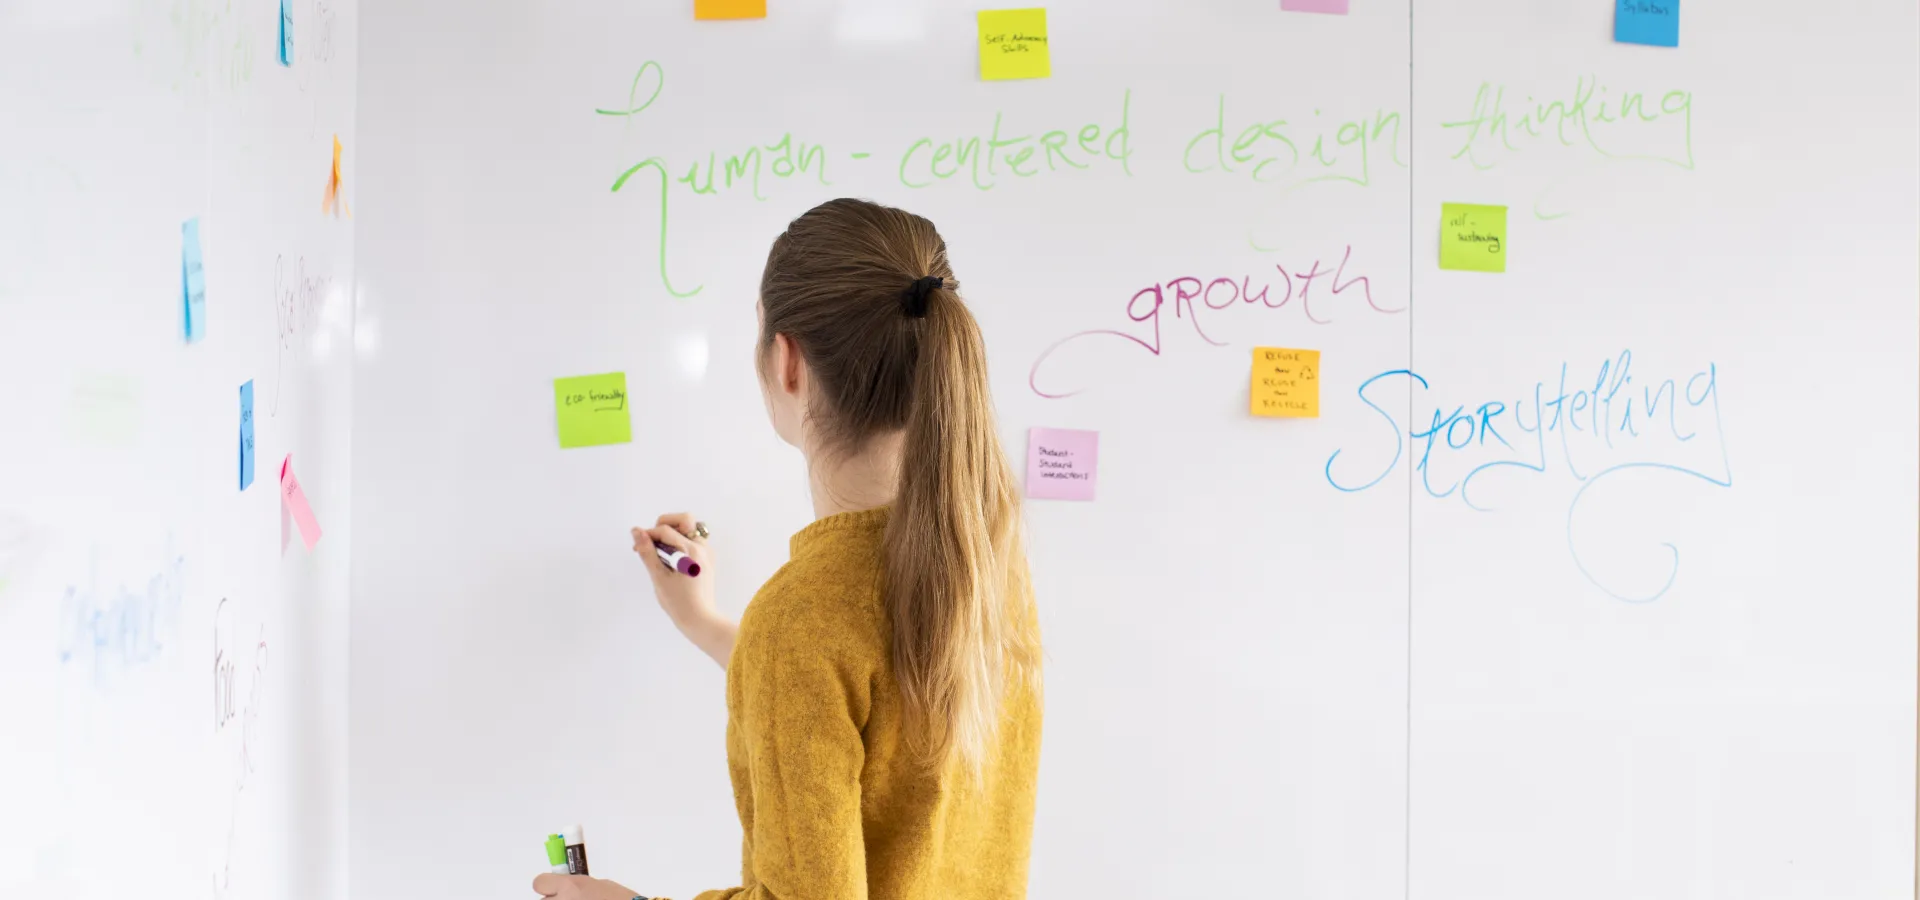 A student stands at a white board, writing.